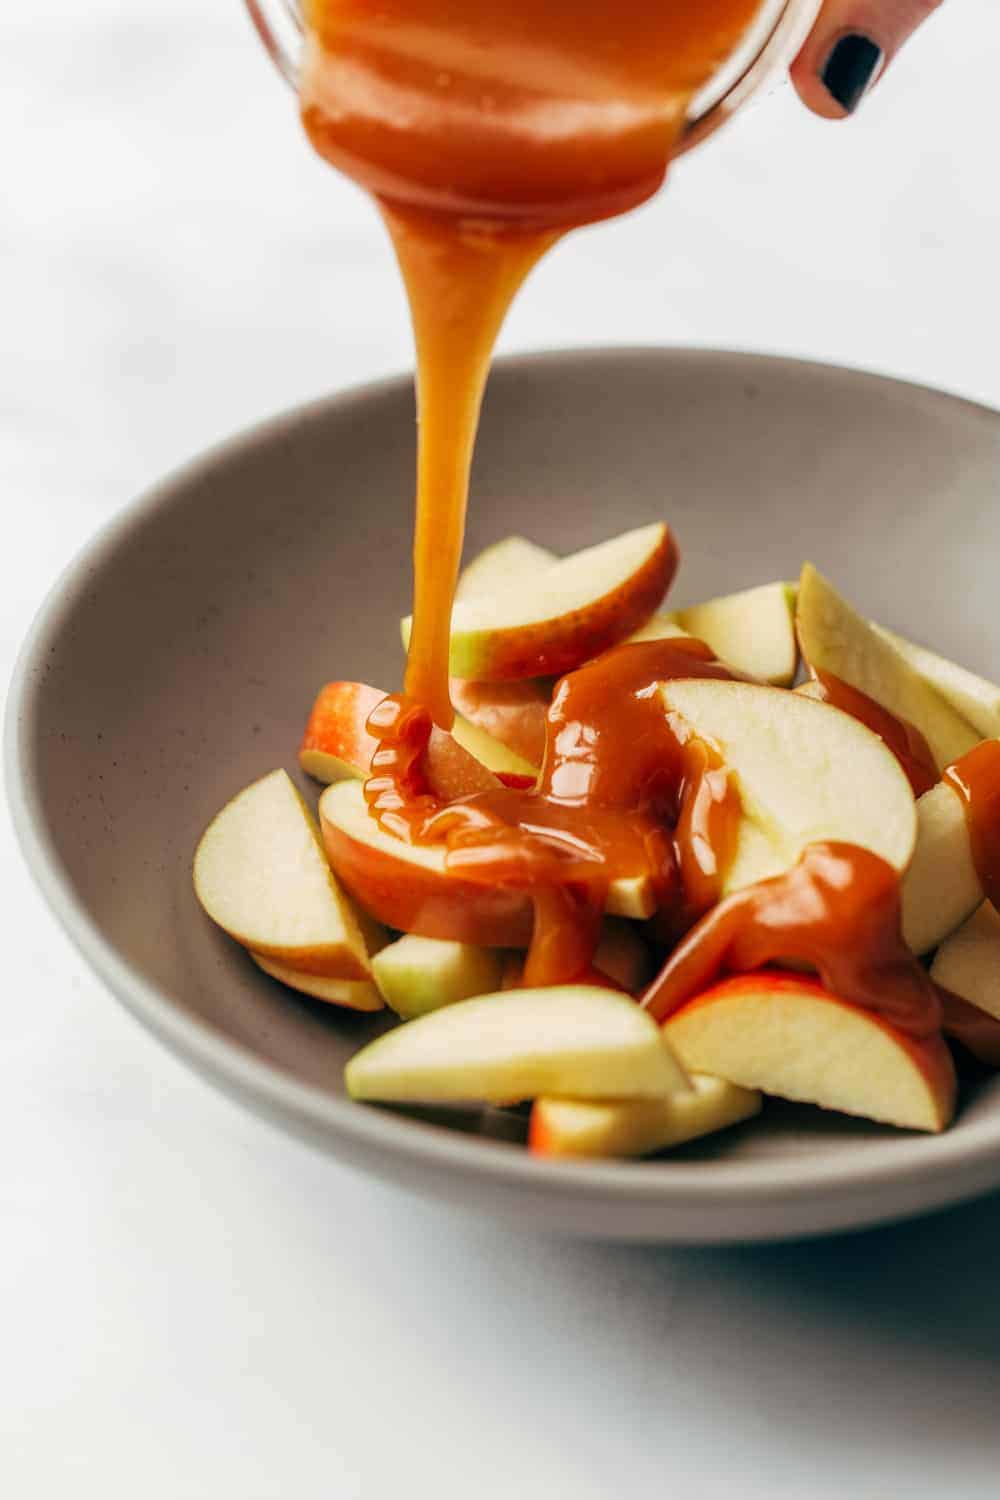 Salted caramel sauce is as delicious over sliced apples as it is on ice cream or brownies